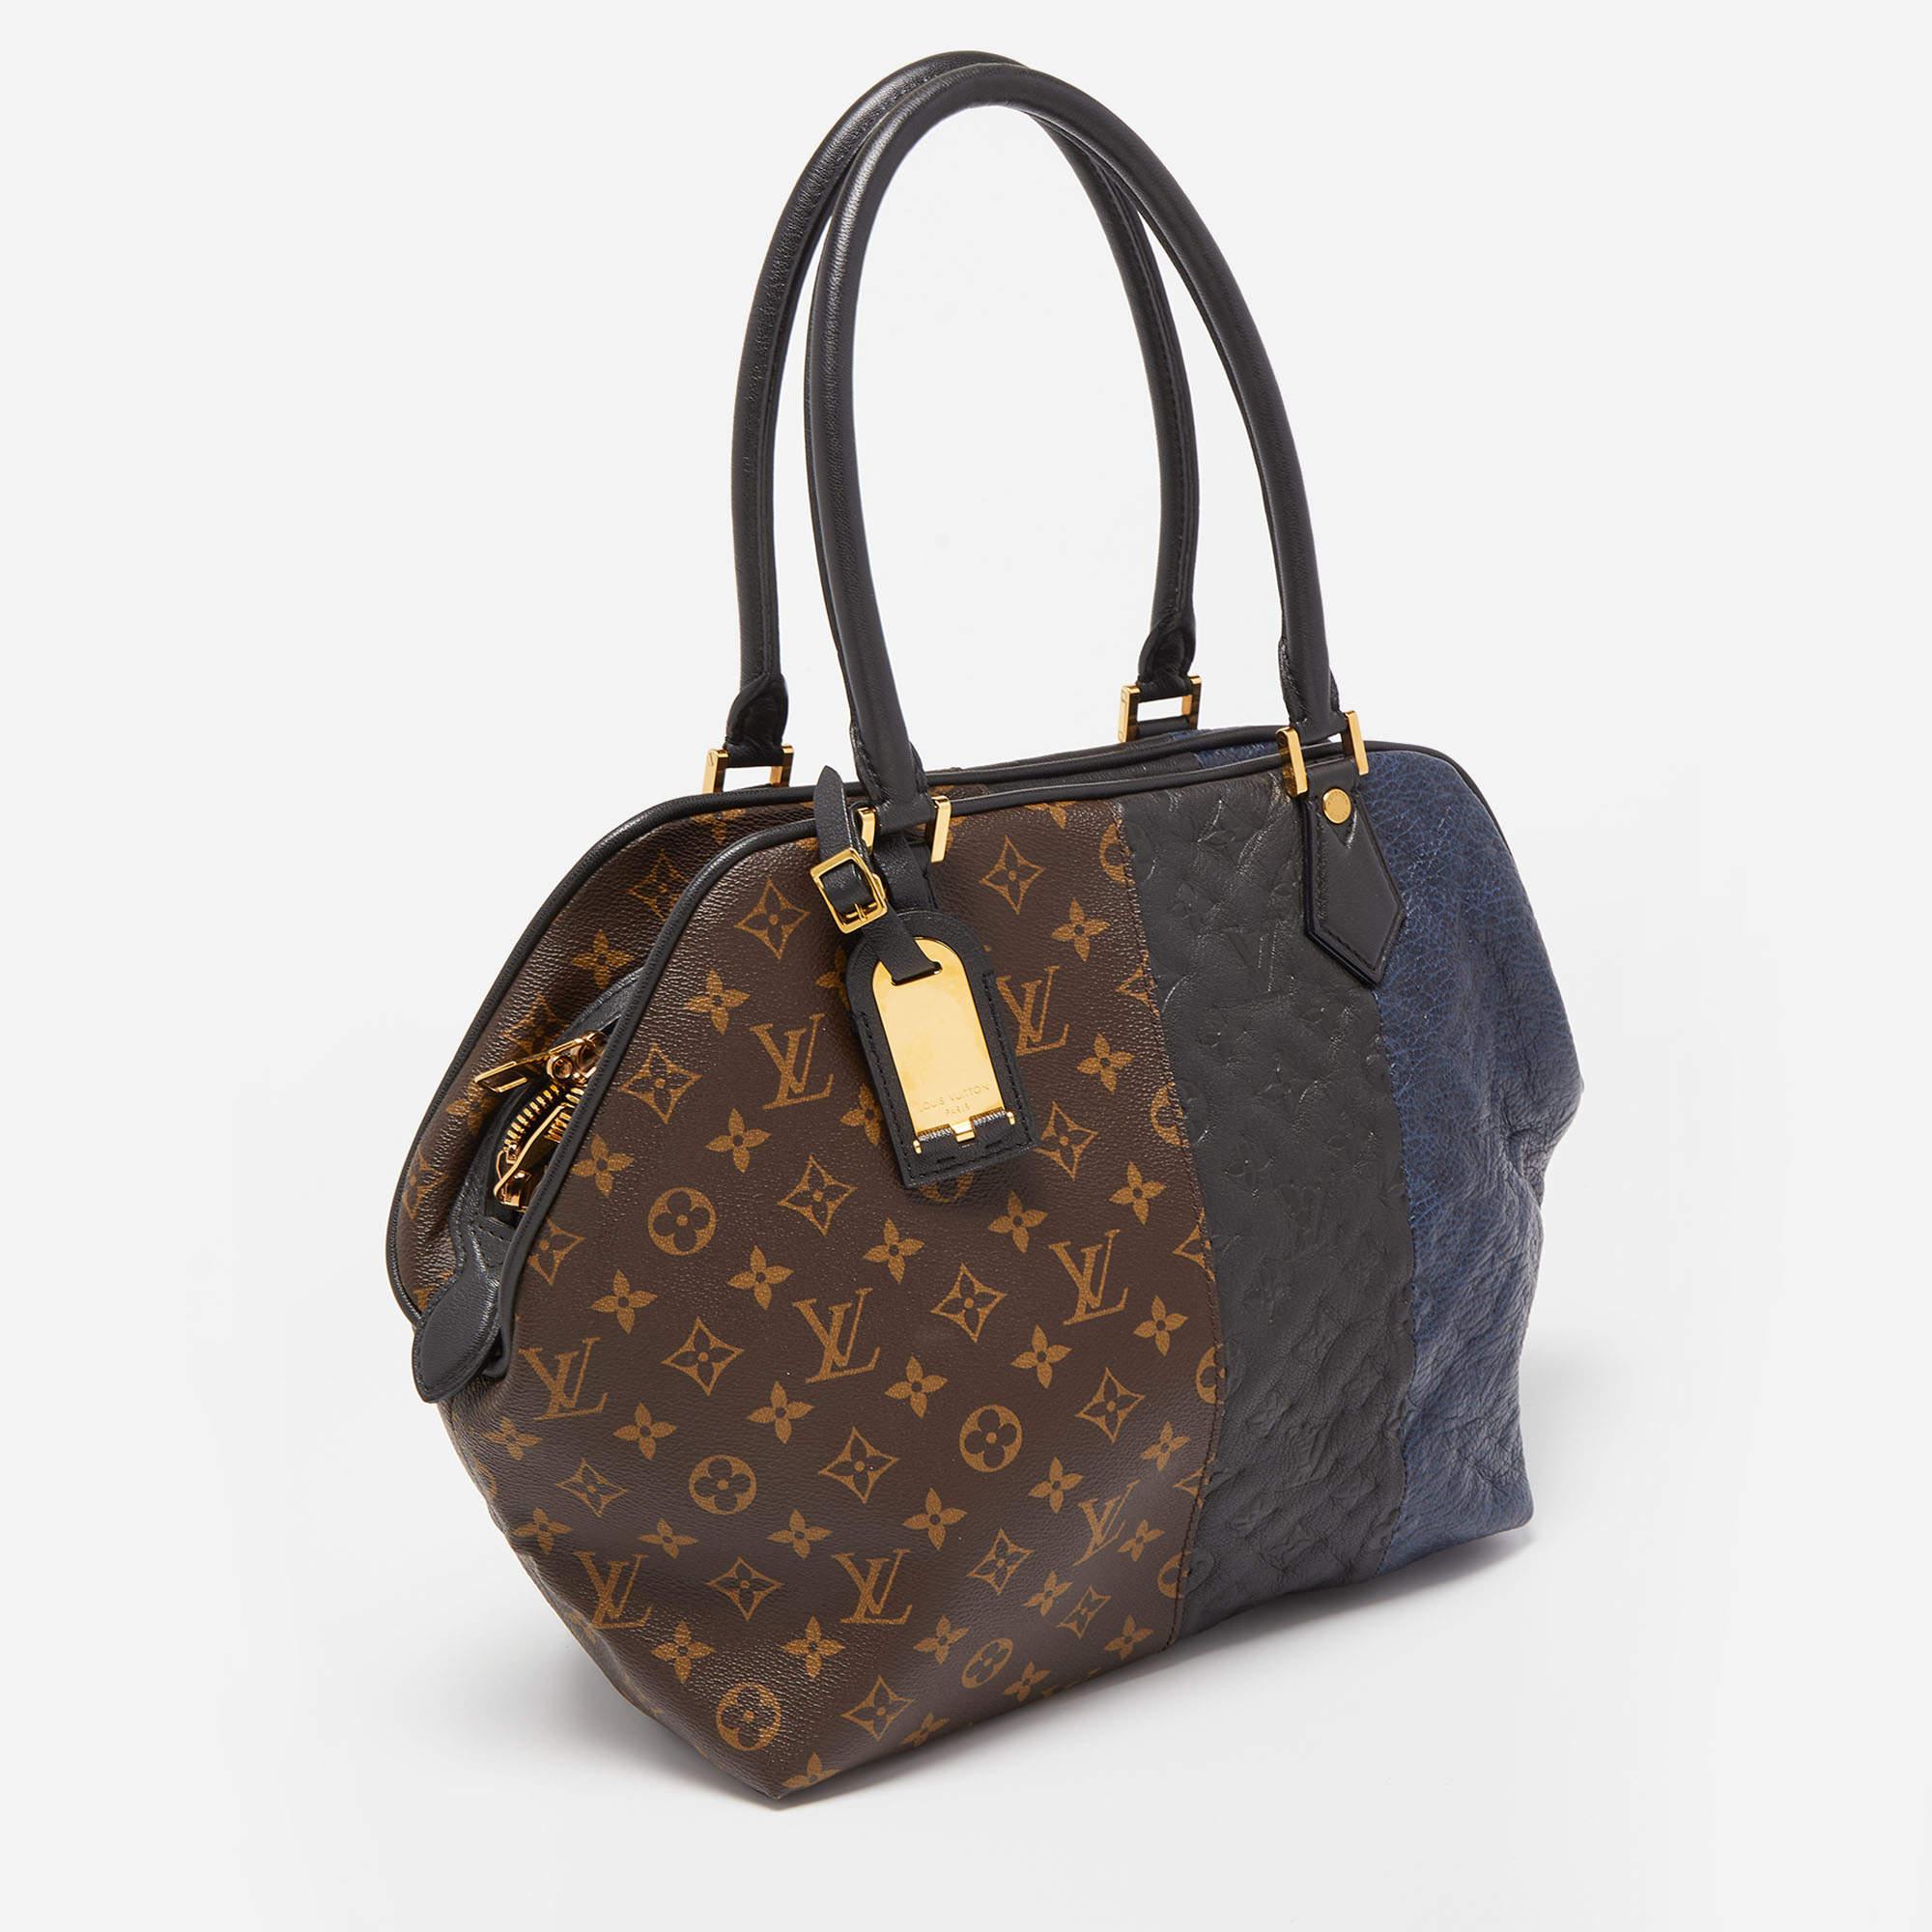 The Louis Vuitton Blocks bag is a luxurious and exclusive fashion accessory. This exquisite handbag features a combination of the iconic LV monogram canvas and premium empreinte leather, adorned with unique block patterns. It boasts a practical